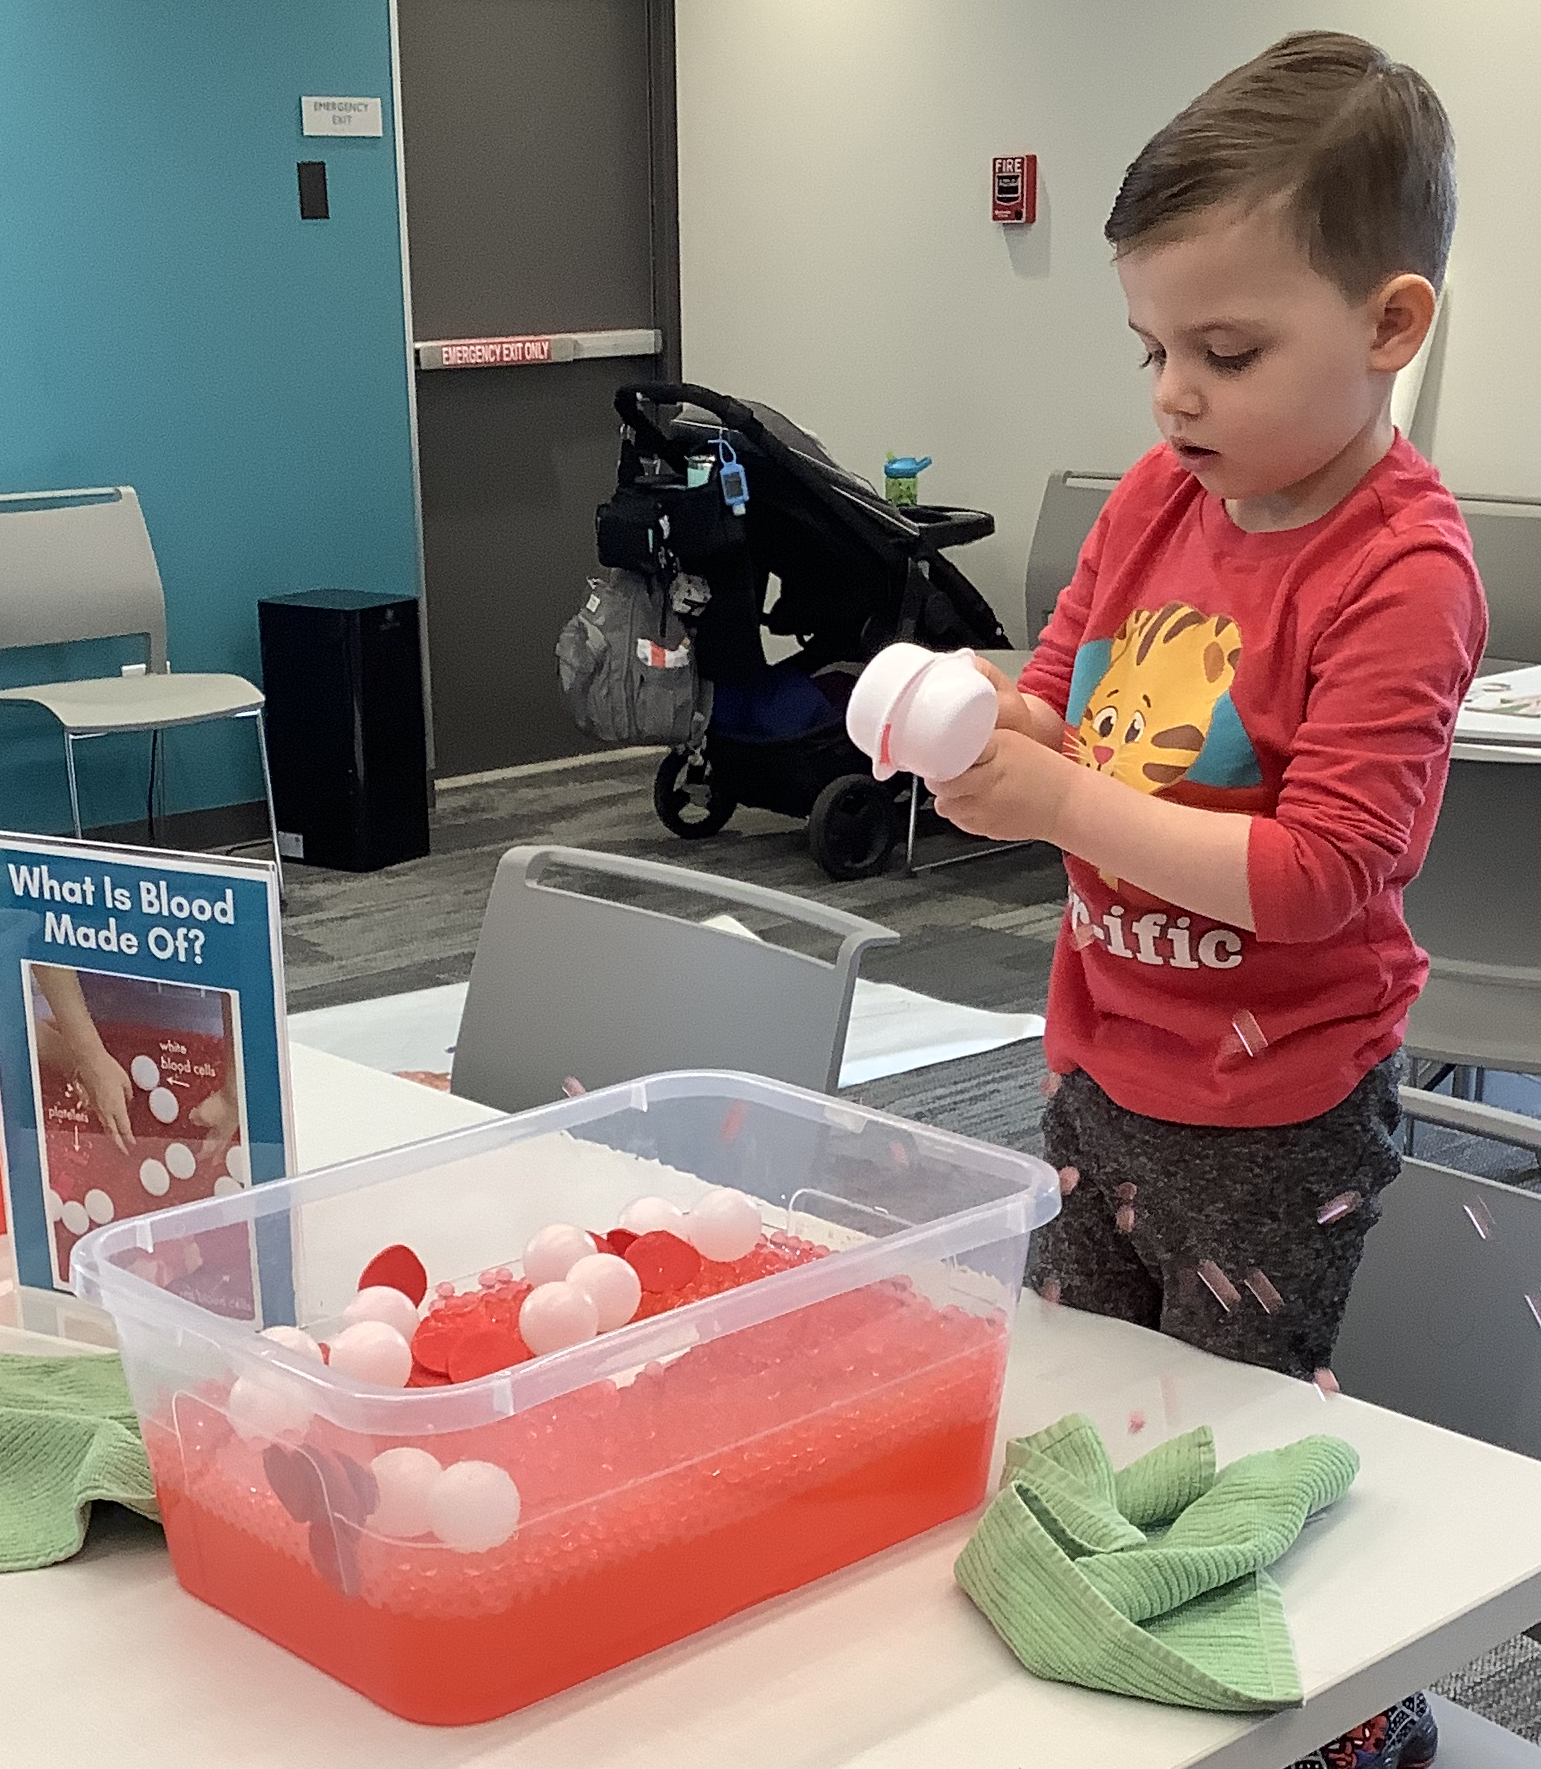 Child examining a water bead sensory bin made to represent blood cells.